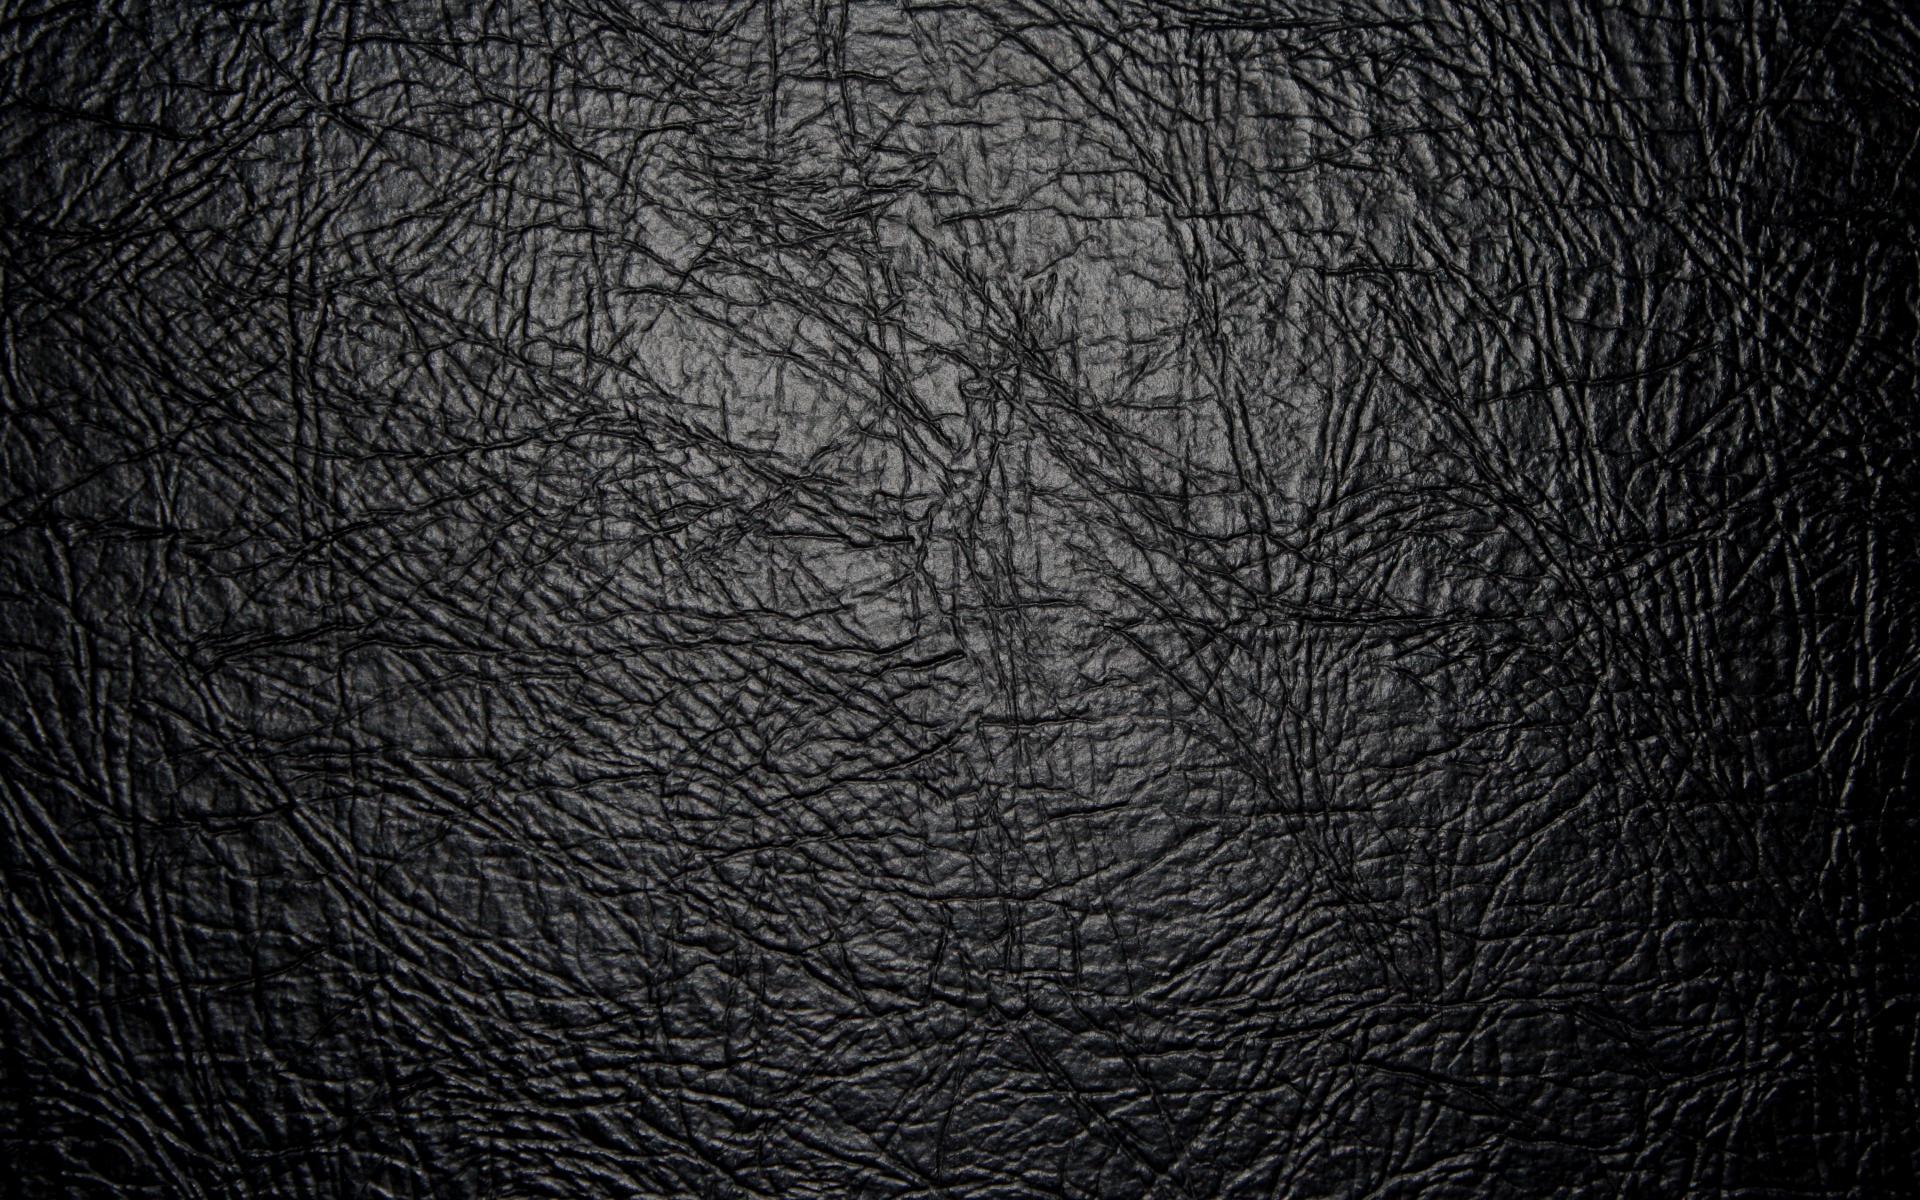 Wallpaper.wiki Black Leather Texture Web Background 1920x1200 PIC